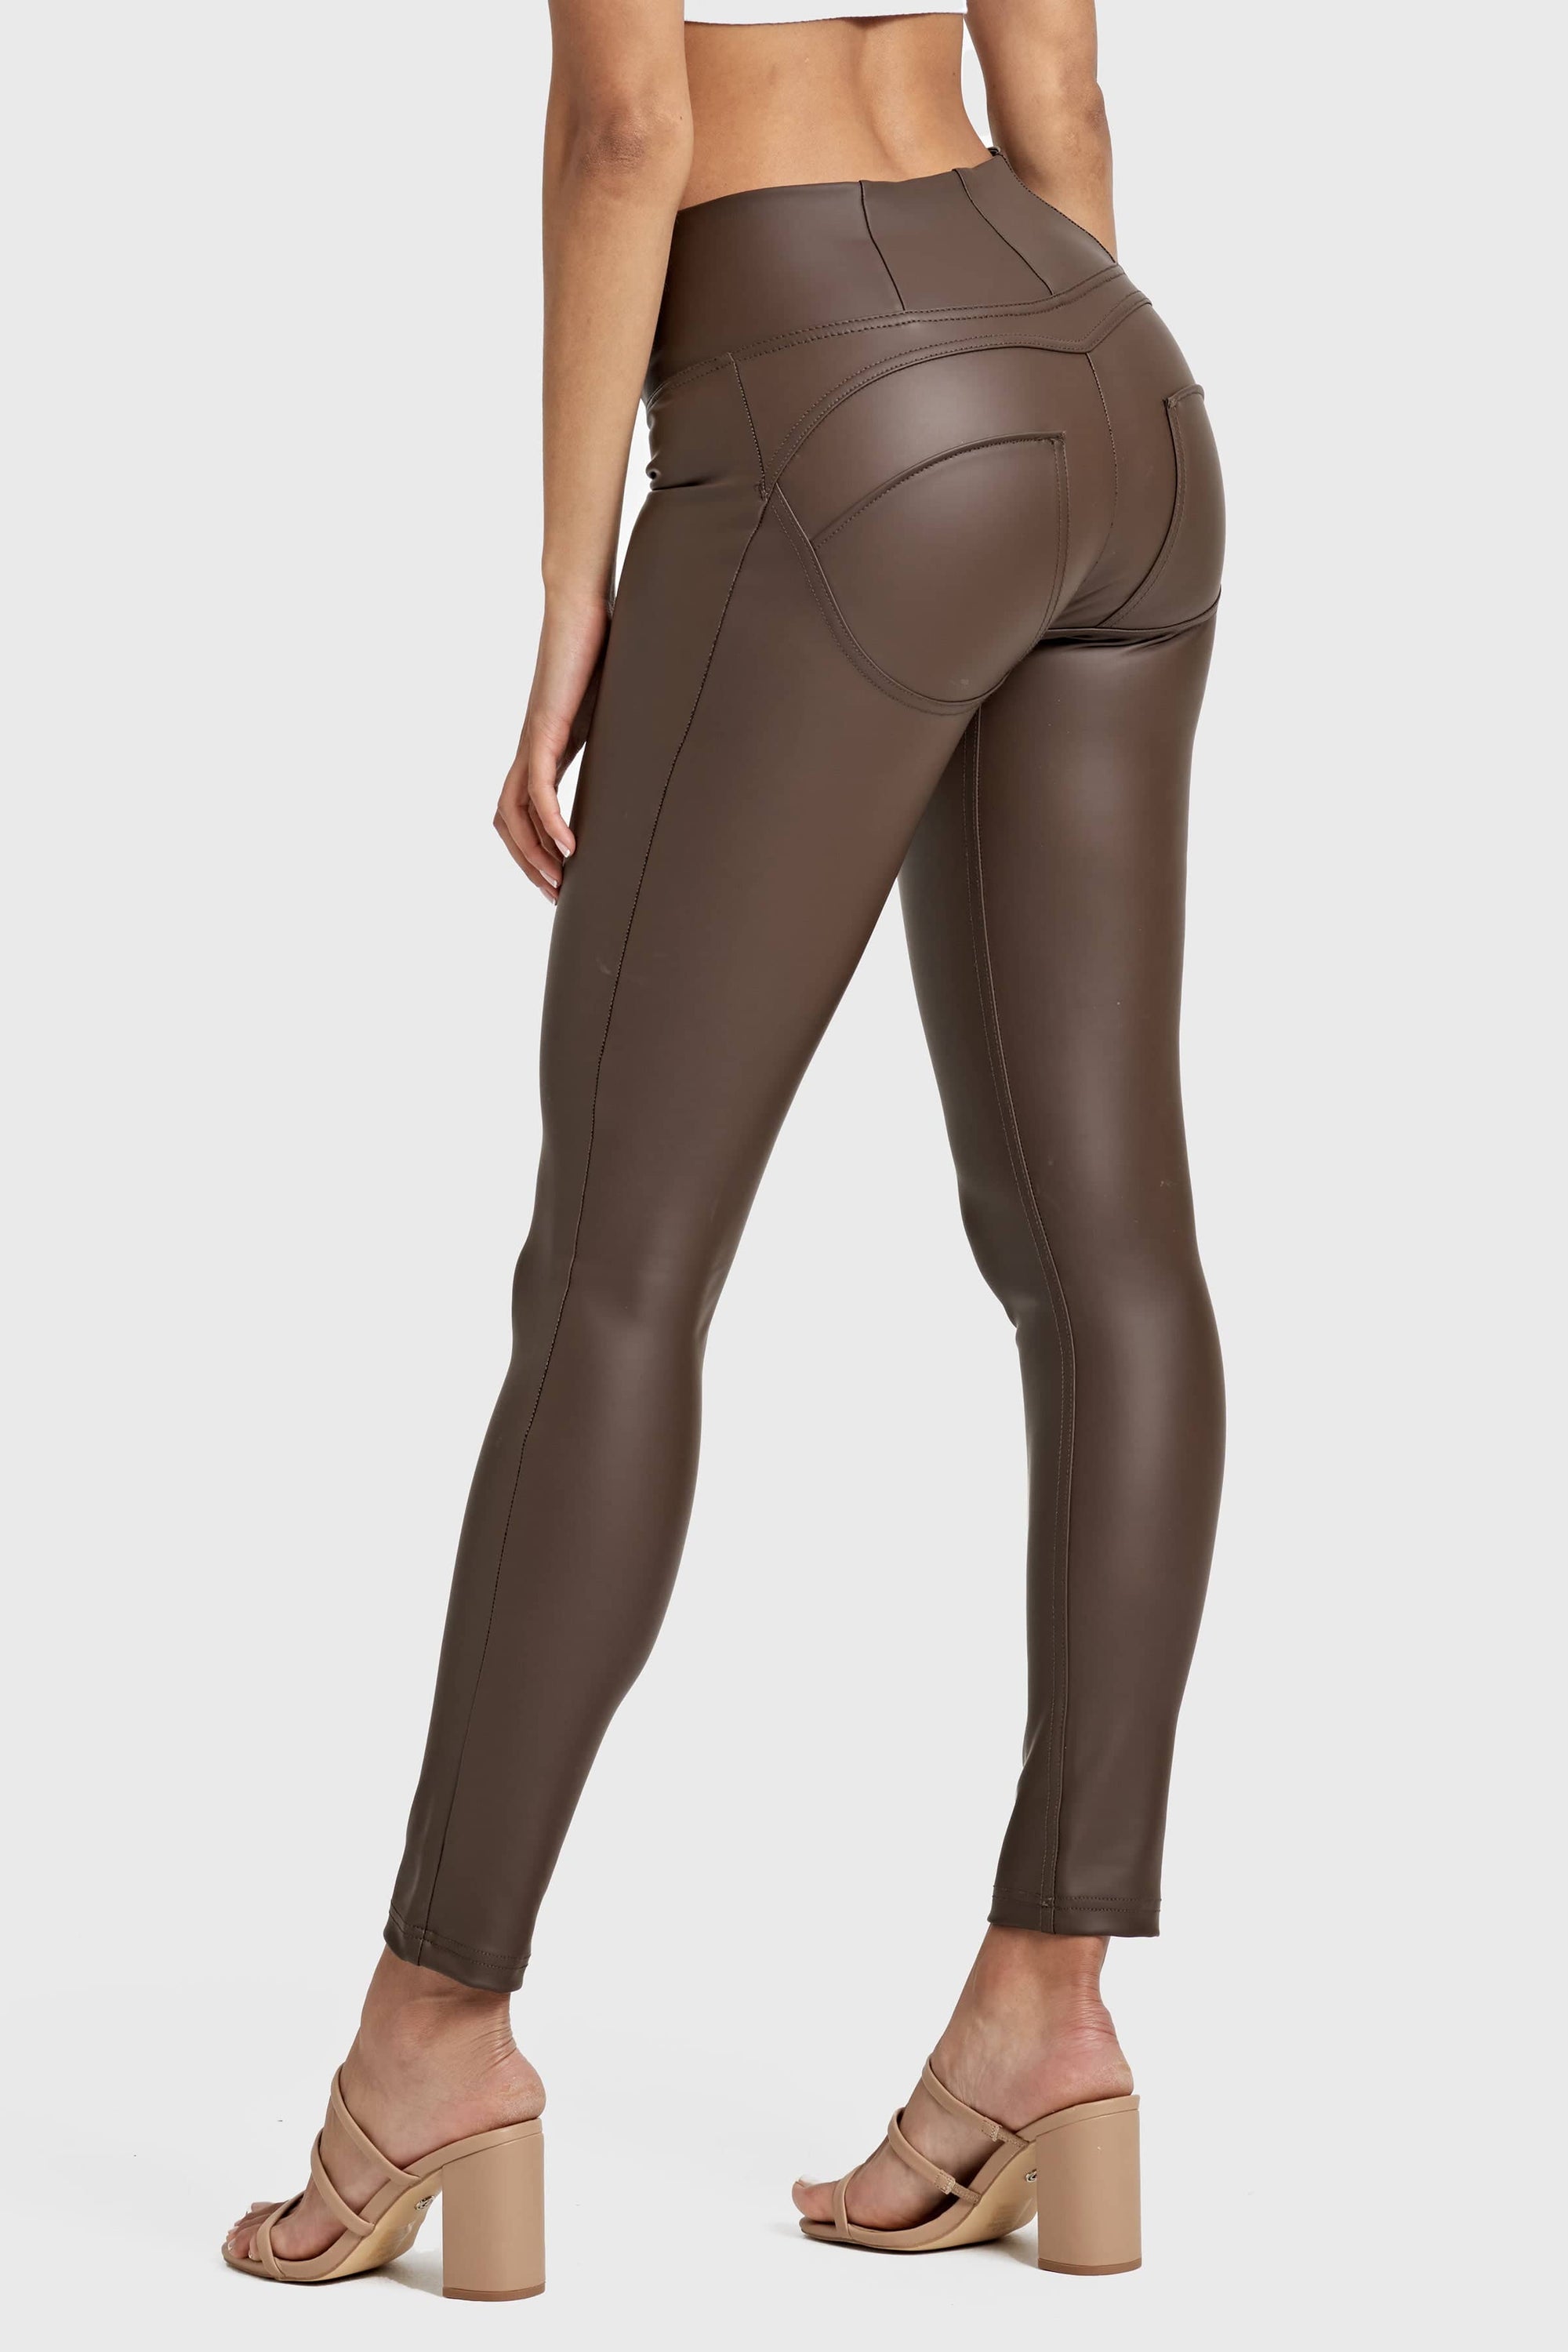 WR.UP® Faux Leather - High Waisted - Full Length - Chocolate 9